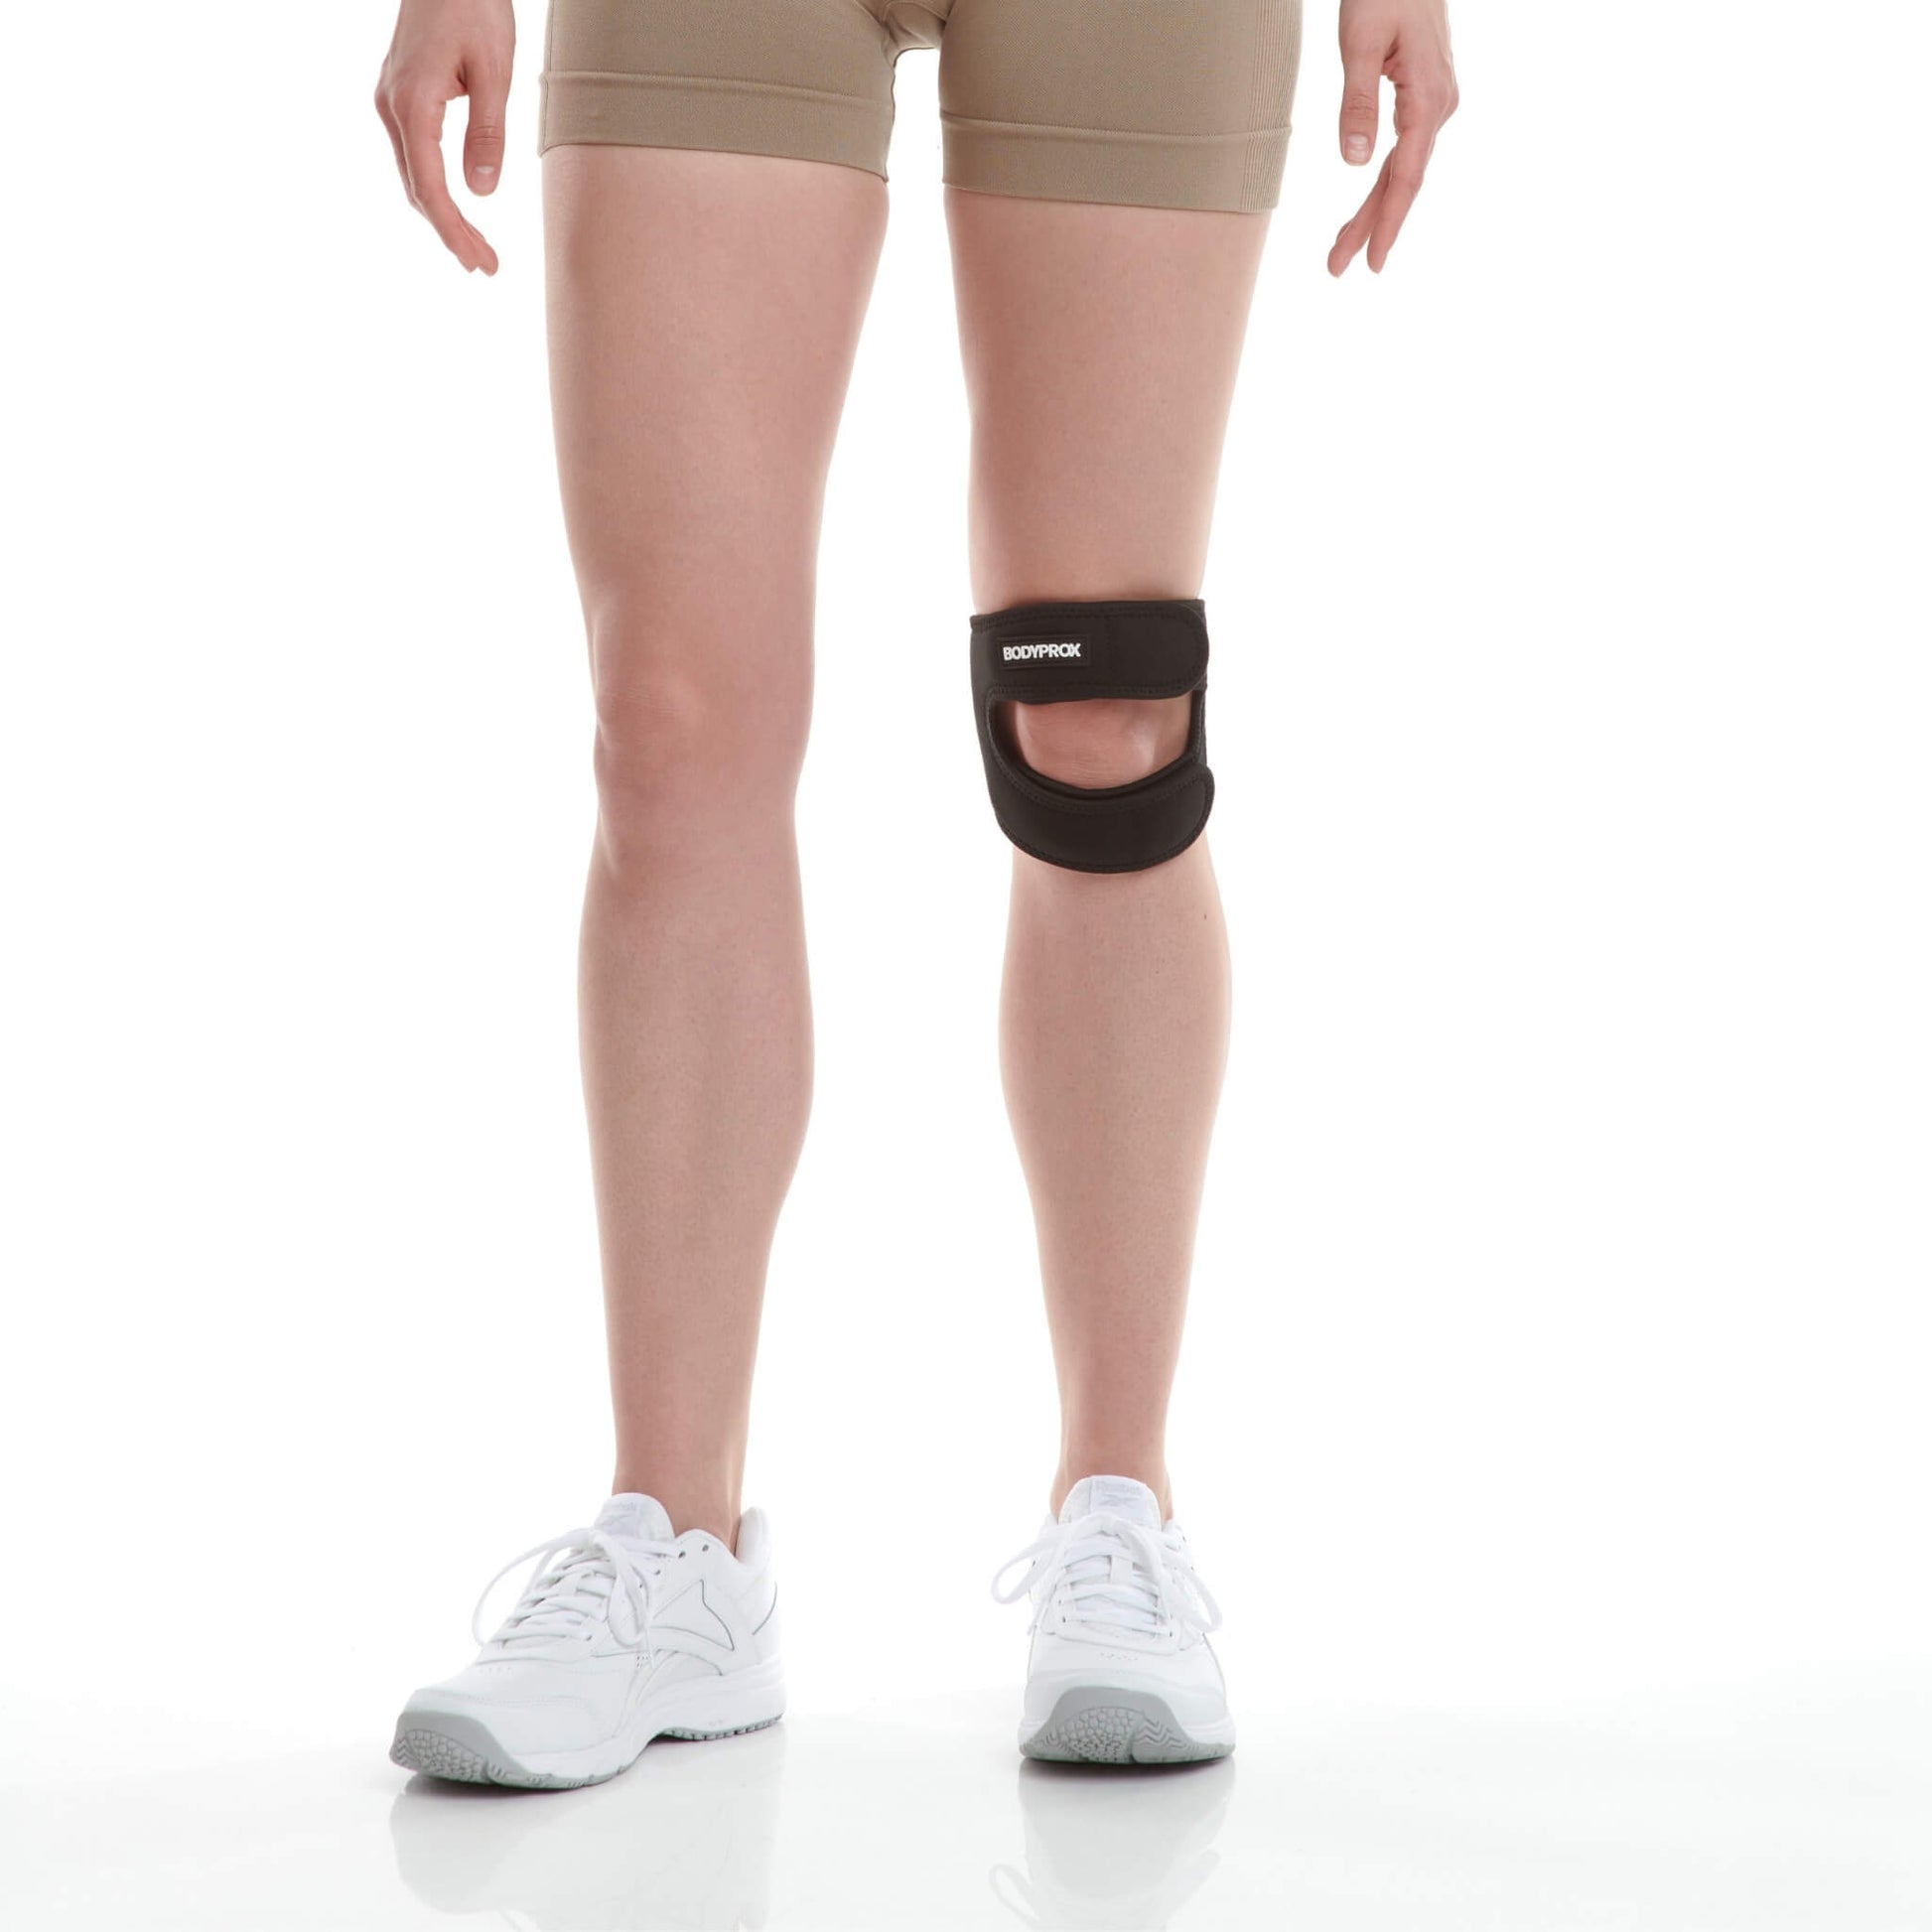 Buy Patellar Tendon Support Strap (Large), Knee Pain Relief